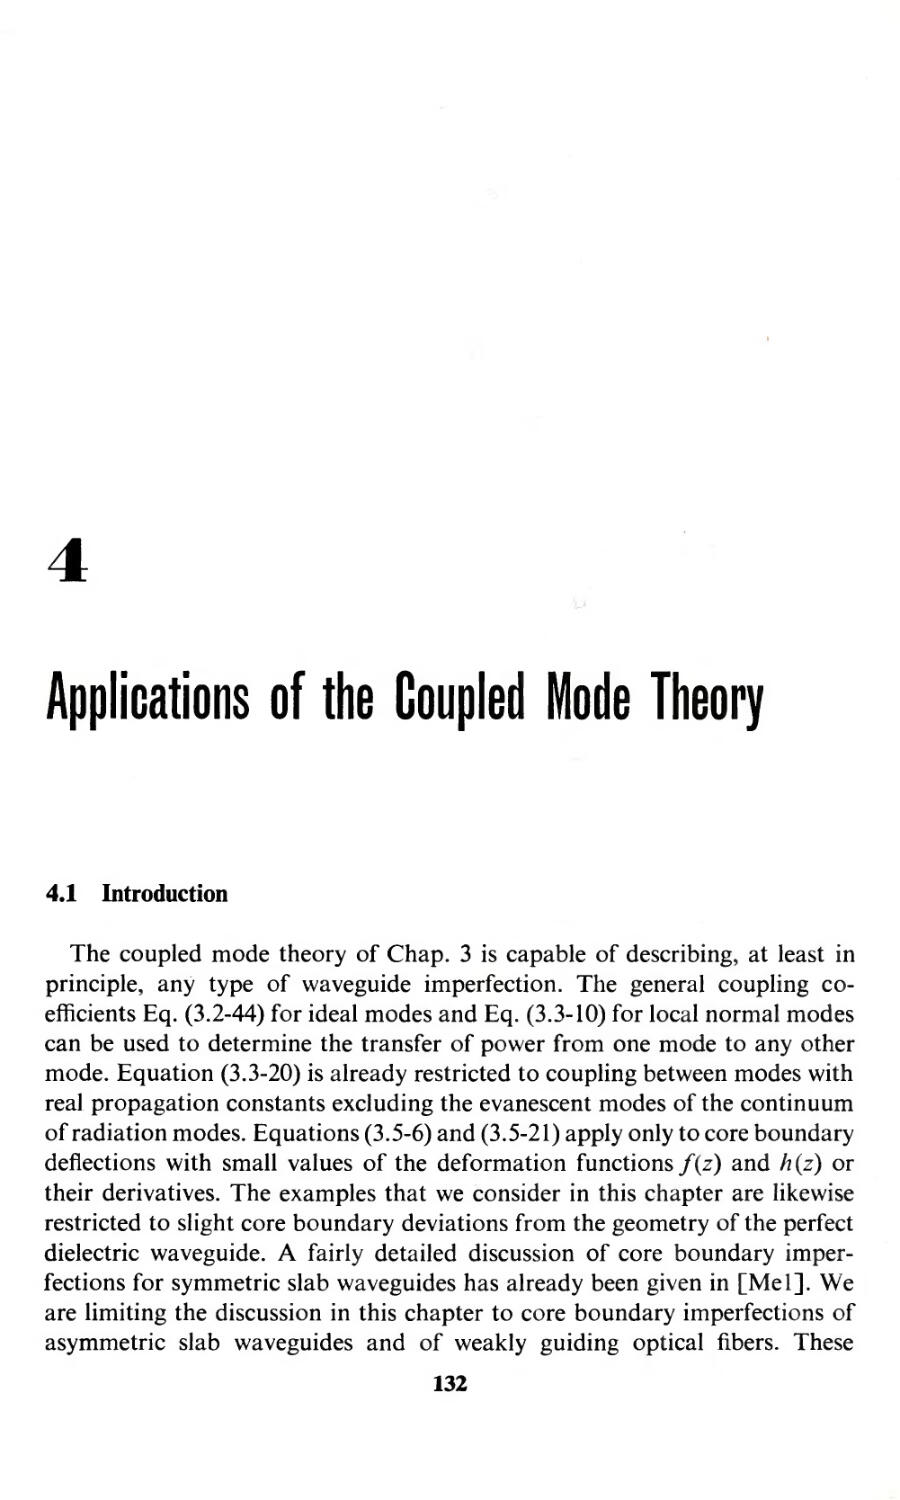 Chapter 4. Applications of the Coupled Mode Theory
Core boundary imperfection, 132
Waveguide imperfections, 132